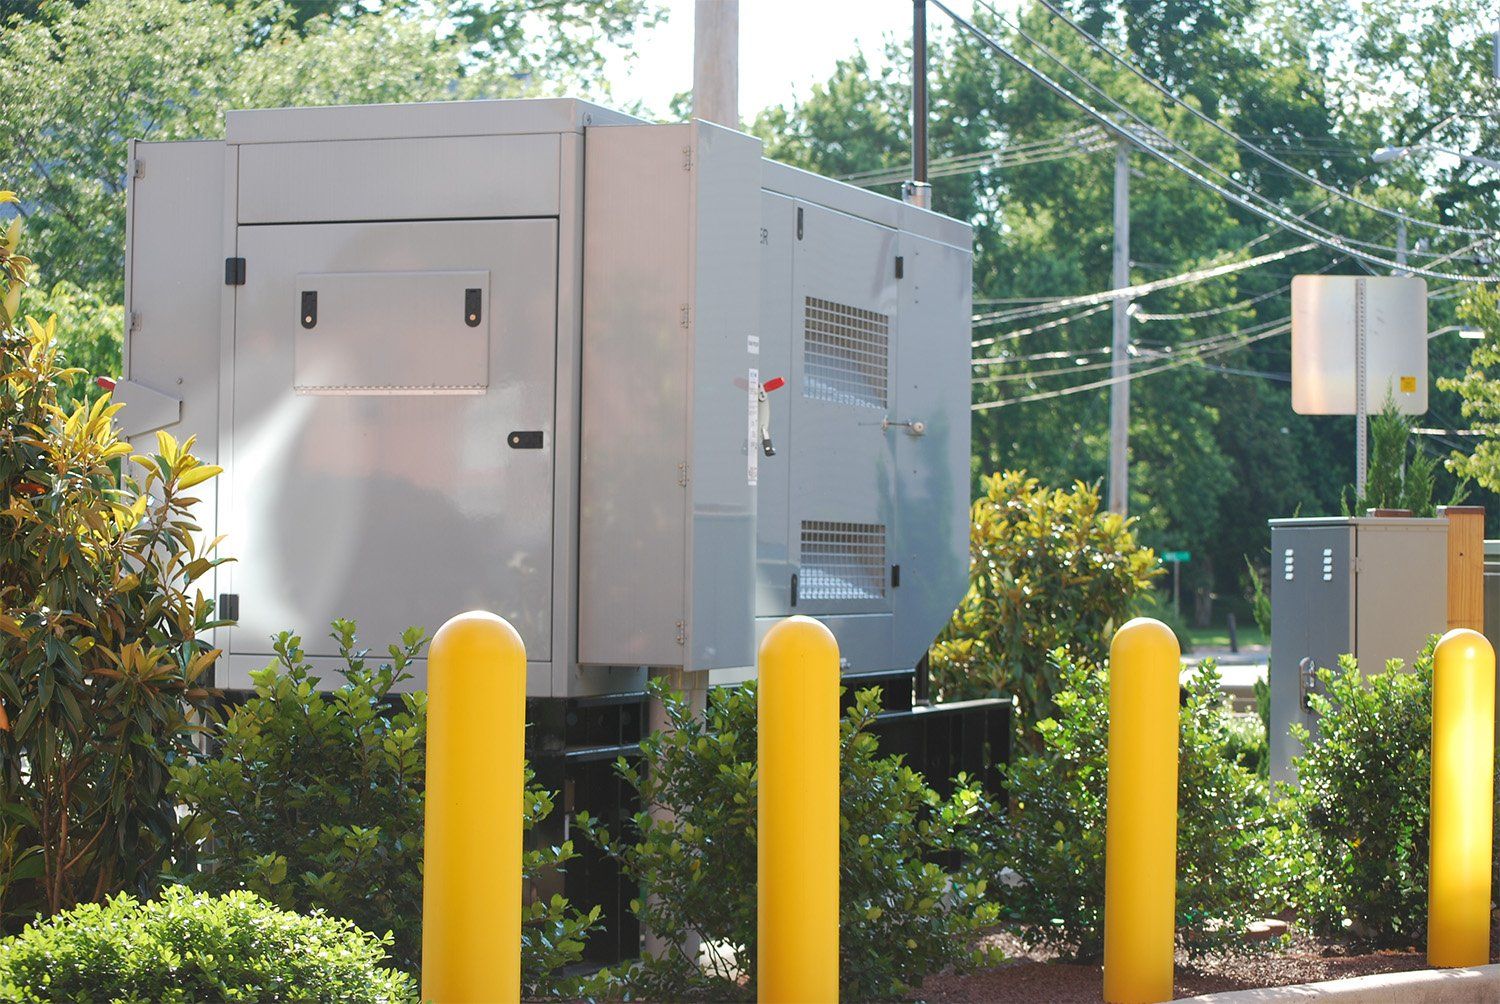 Generator at a hospital - Commercial Generator Services in Rhodesdale, MD